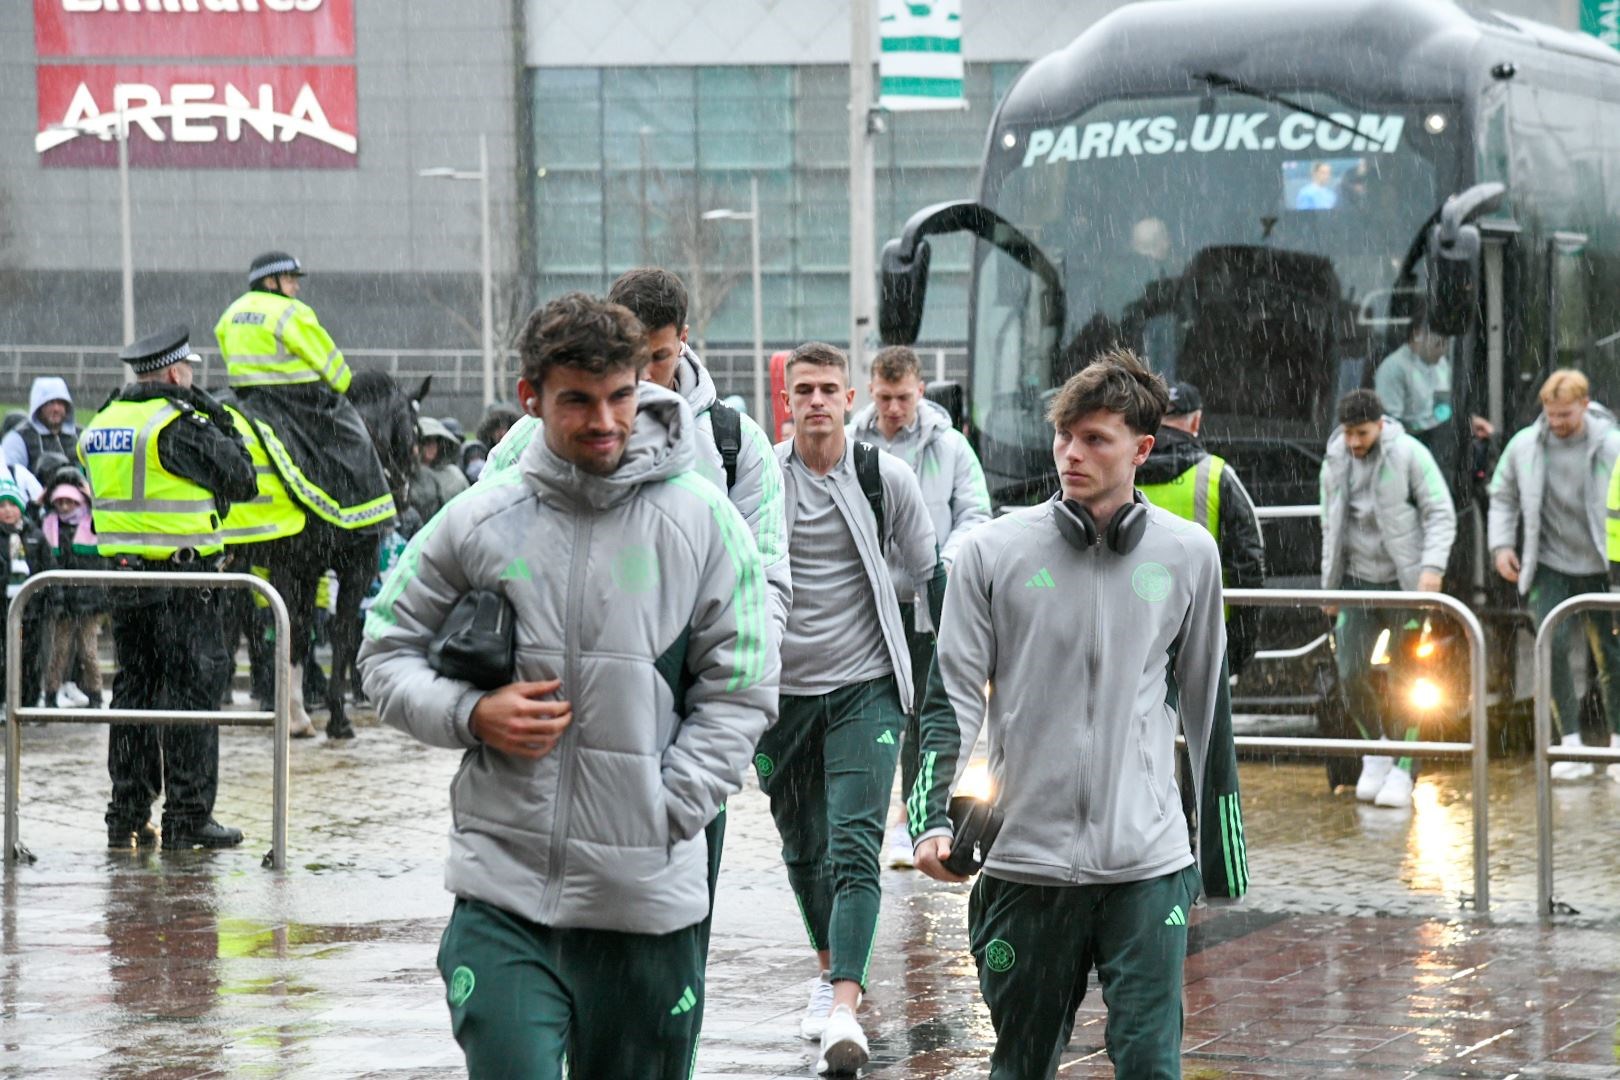 Cetlic players, led by Denmark international Matt O'Riley, arrive at Parkhead. Picture: Beth Taylor